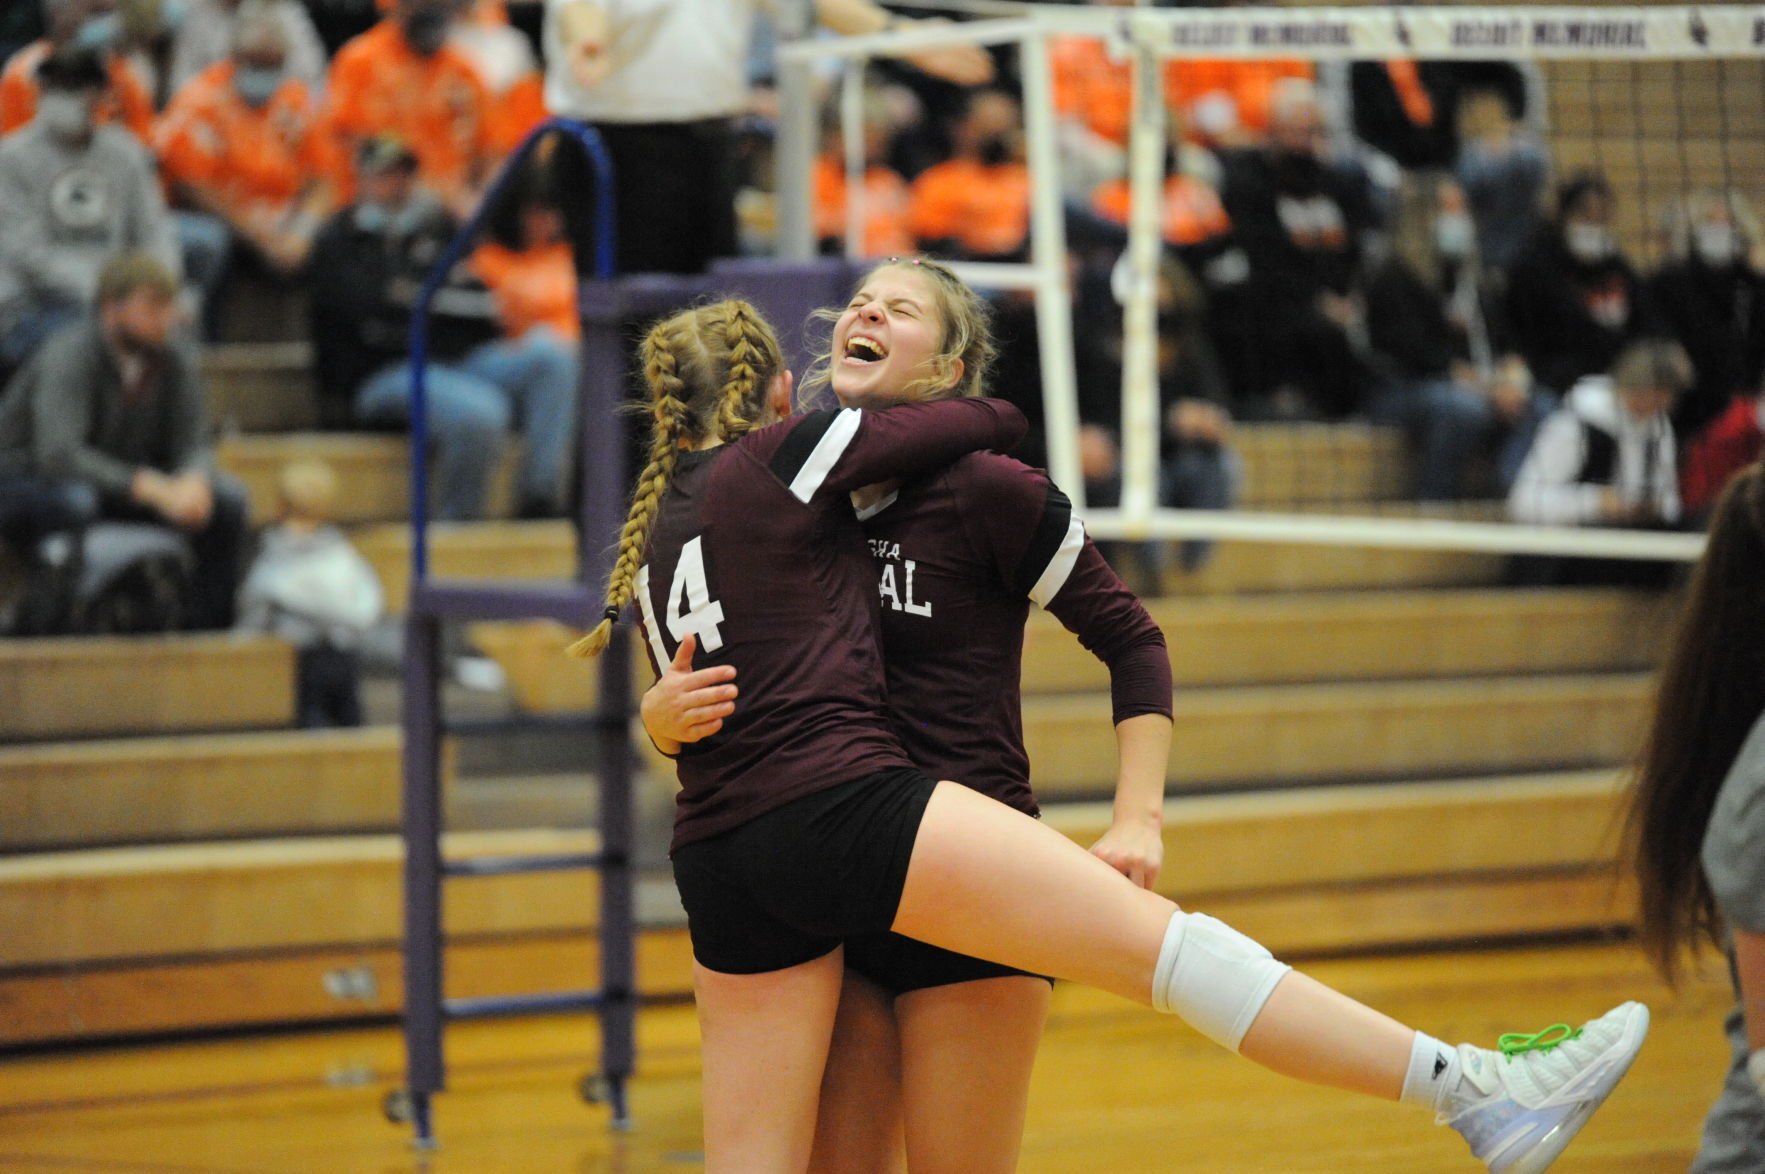 High school girls volleyball Central takes Burlington to 4 sets, falls in sectional semis